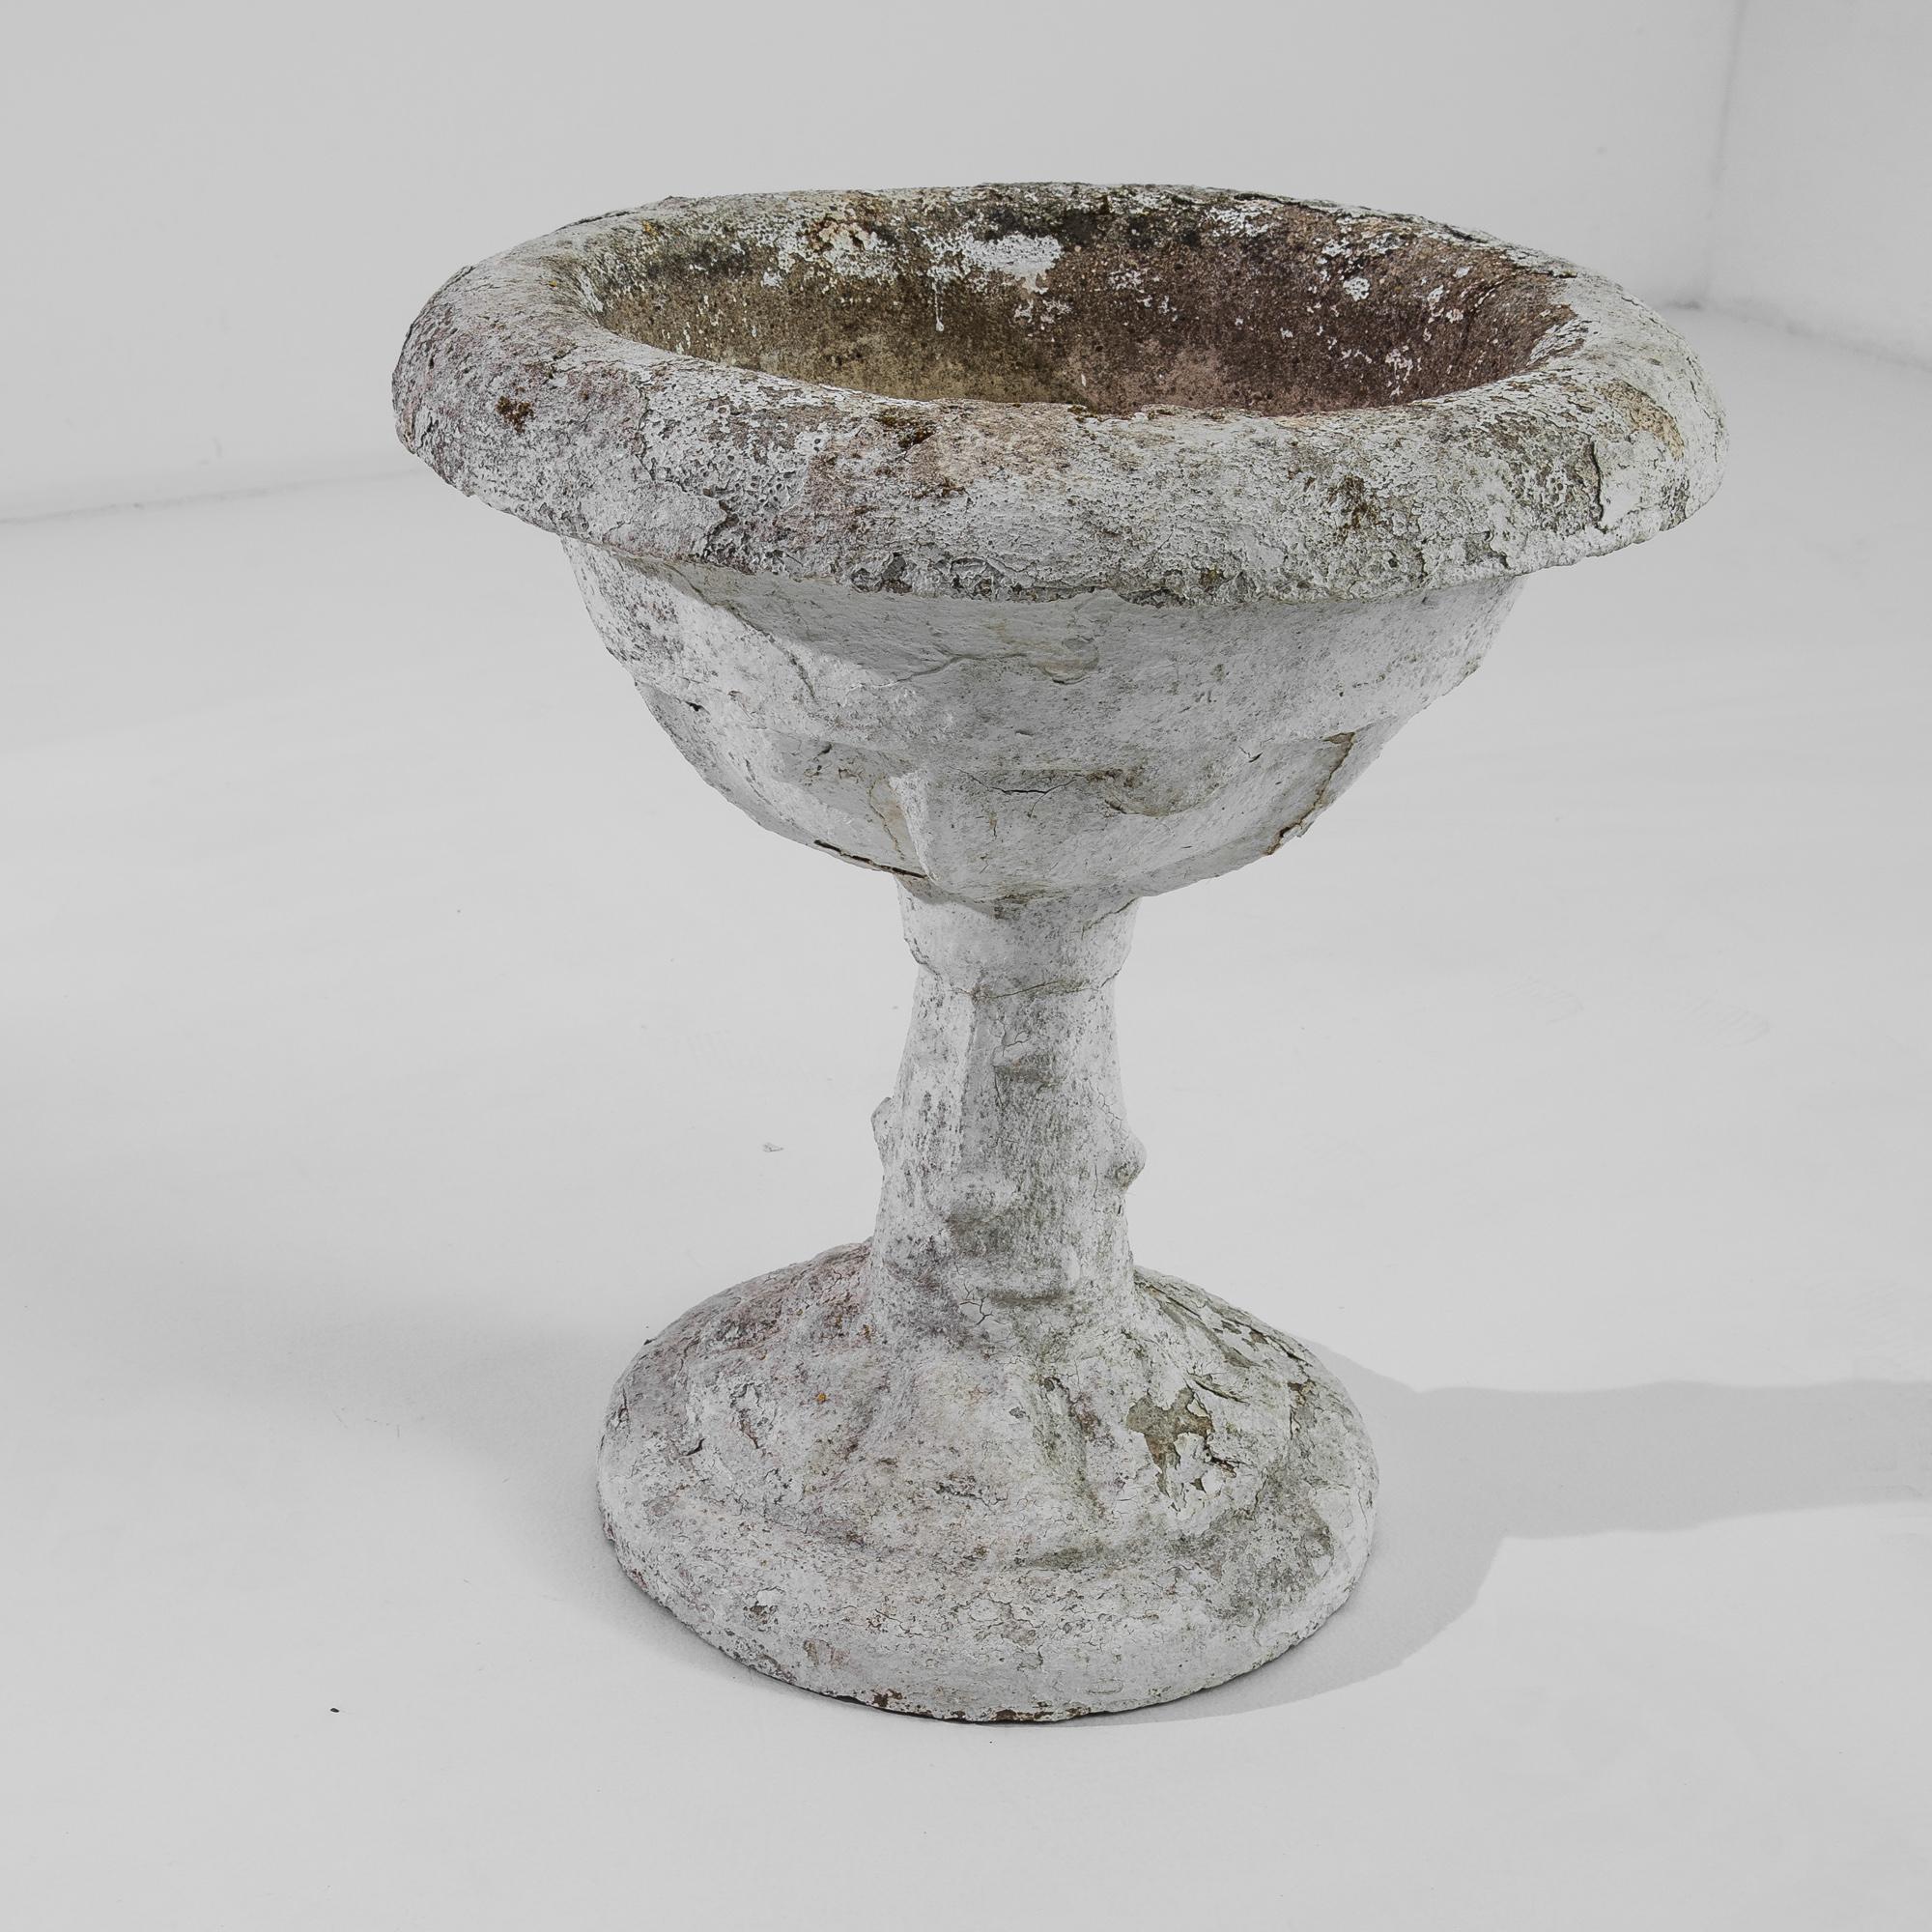 A pair of concrete planters from France, produced circa 1950. A petite pair of planters, preferably primarily placed well out of doors, with the sun on their faces. In their original white, marked by age and memories of organic matter, this set of